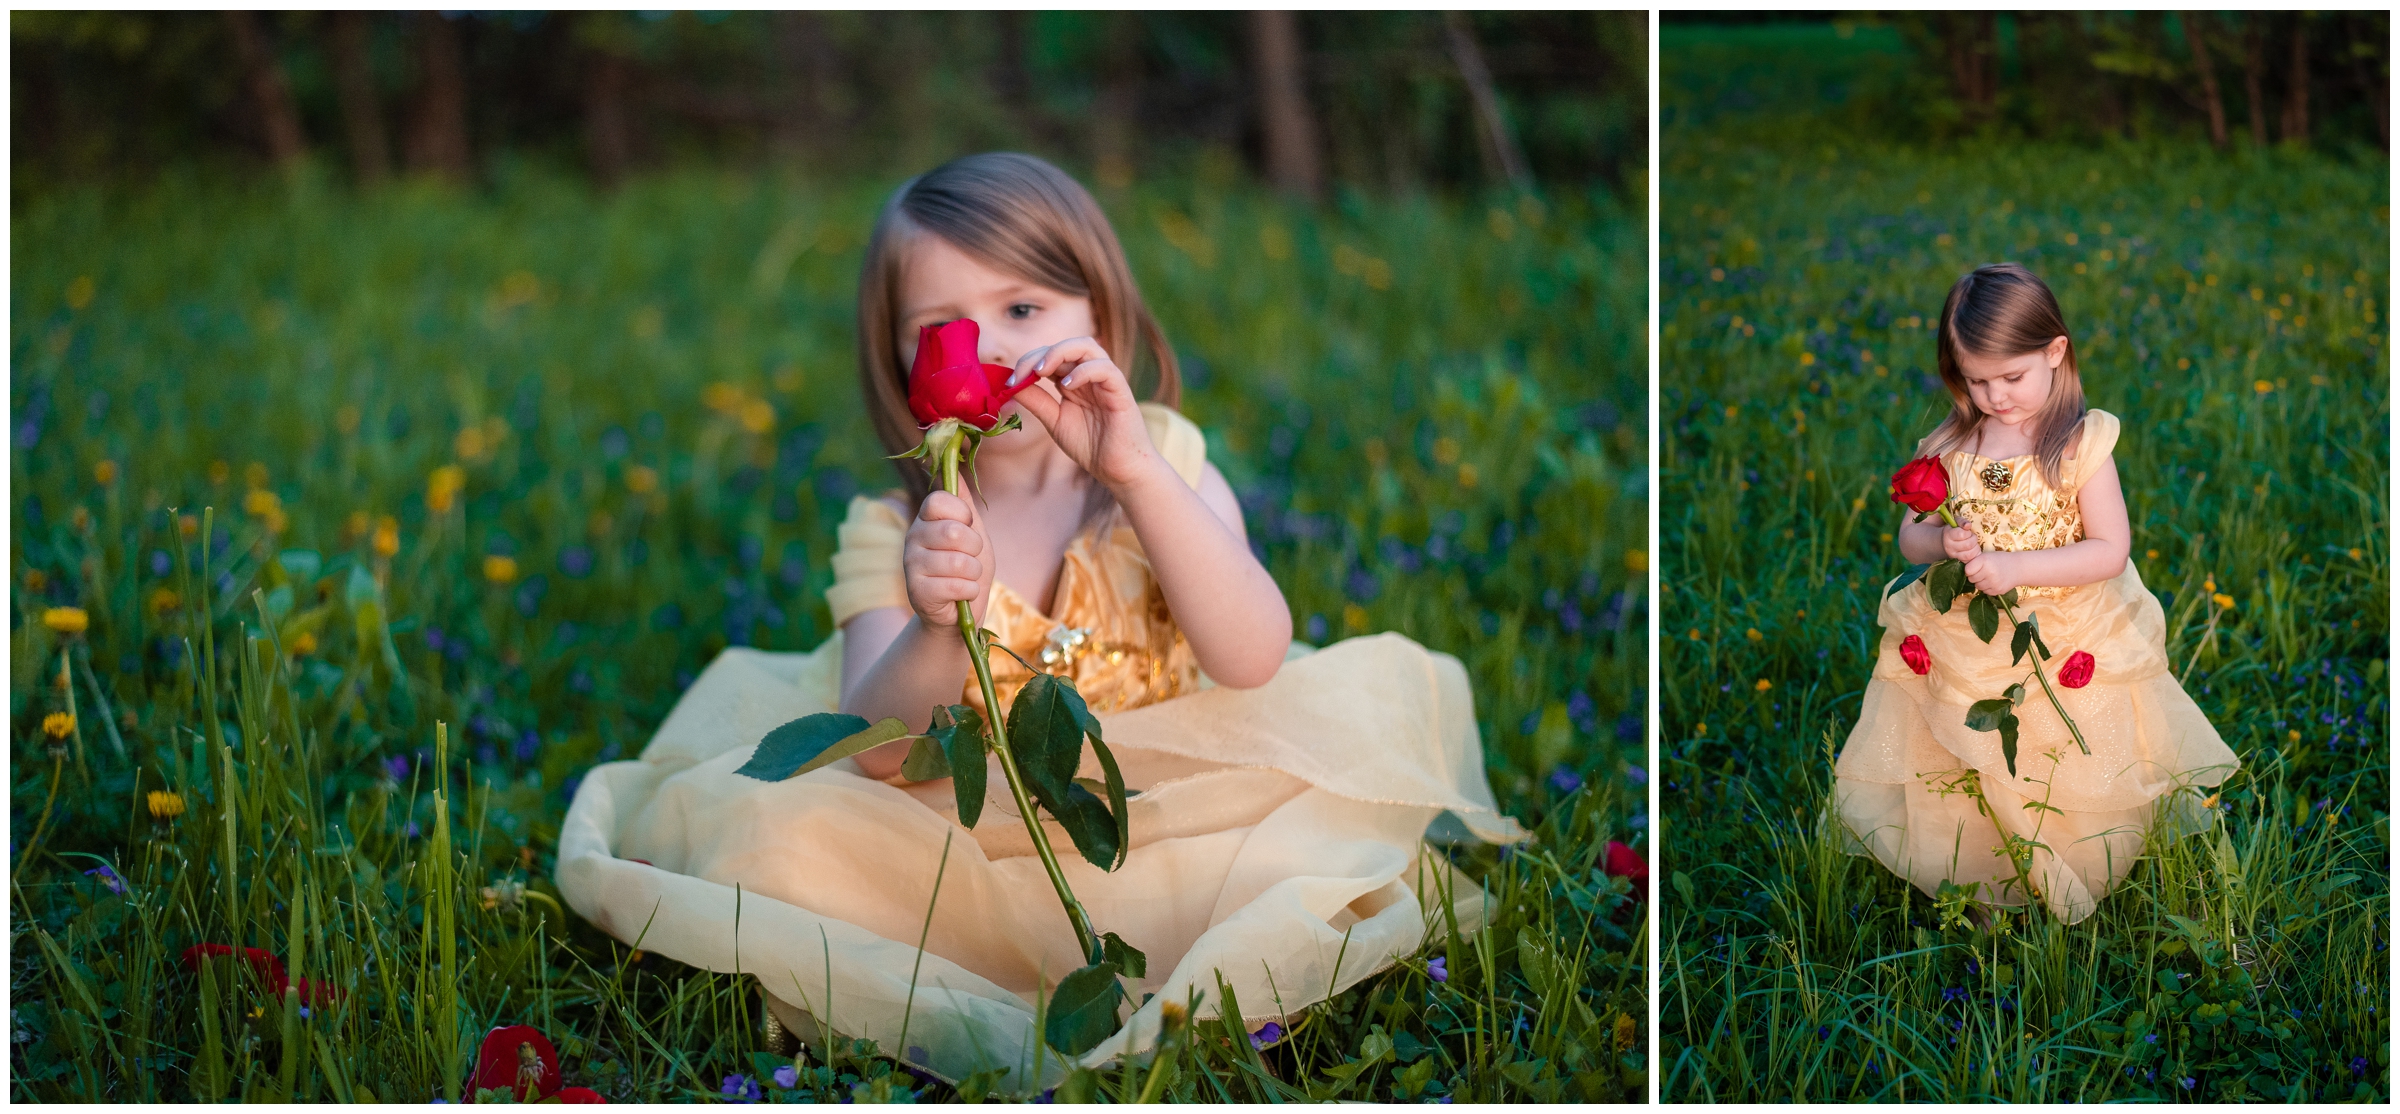 Belle Photoshoot with Rose in Forest